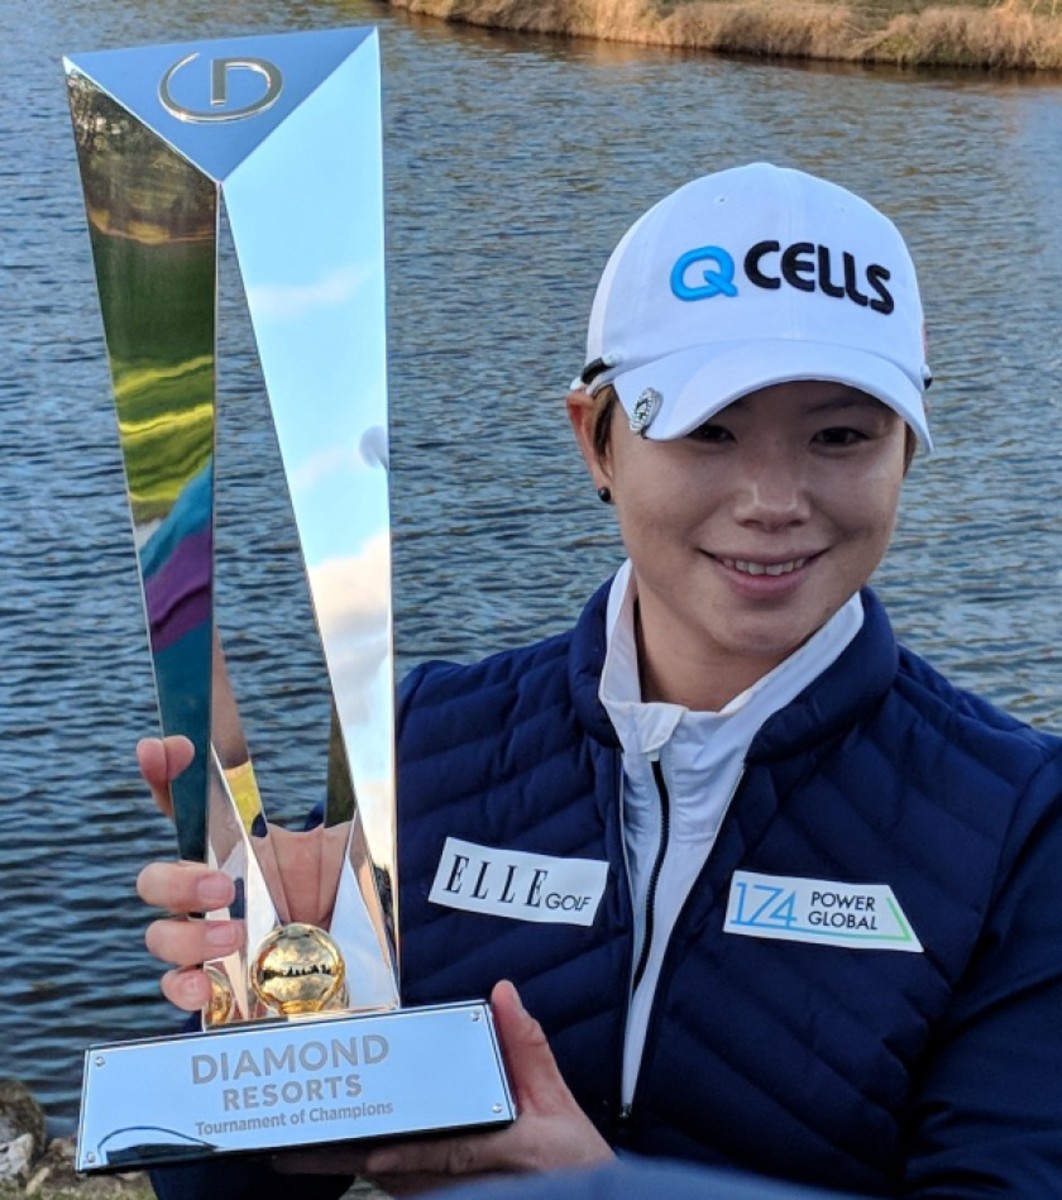 Among all of the winners and celebrities at the LPGA’s Tournament of Champions, South Korea’s Eun-Hee Ji shined brightest.